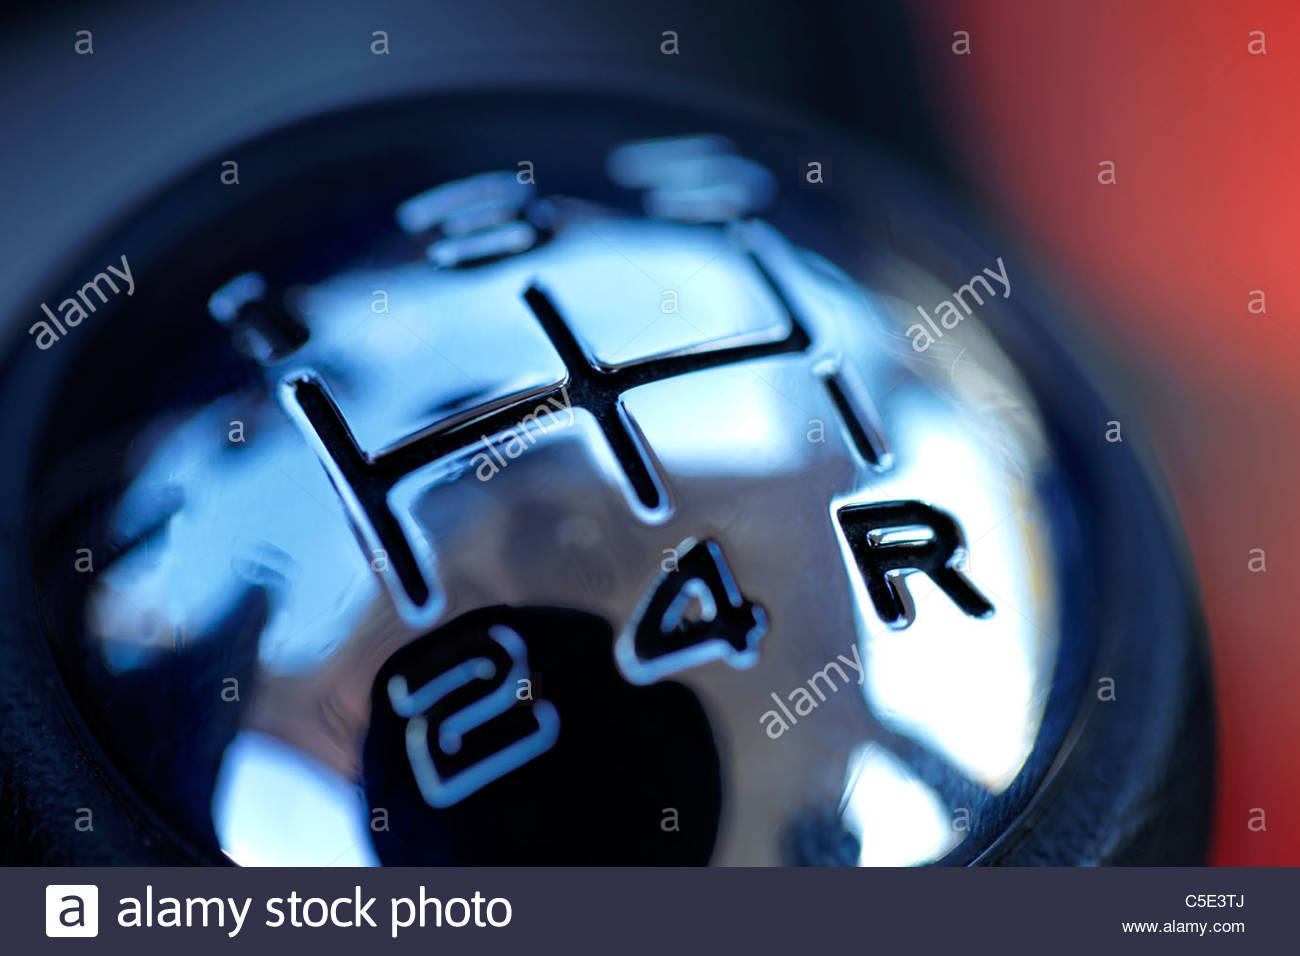 Close Up Of A Shift Knob Against Blurred Background Stock Photo